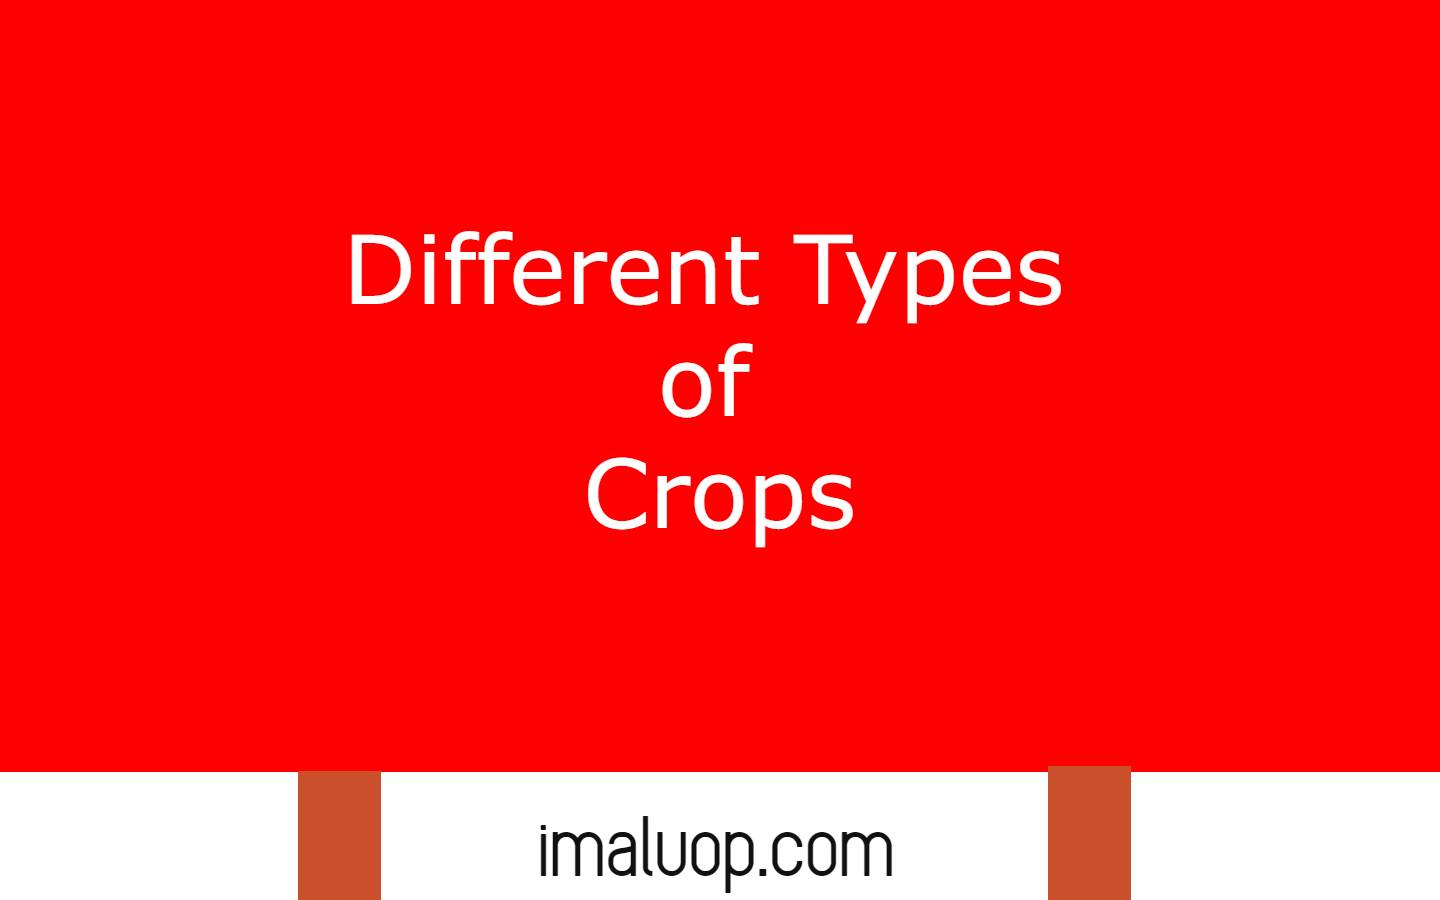 Different Types of Crops